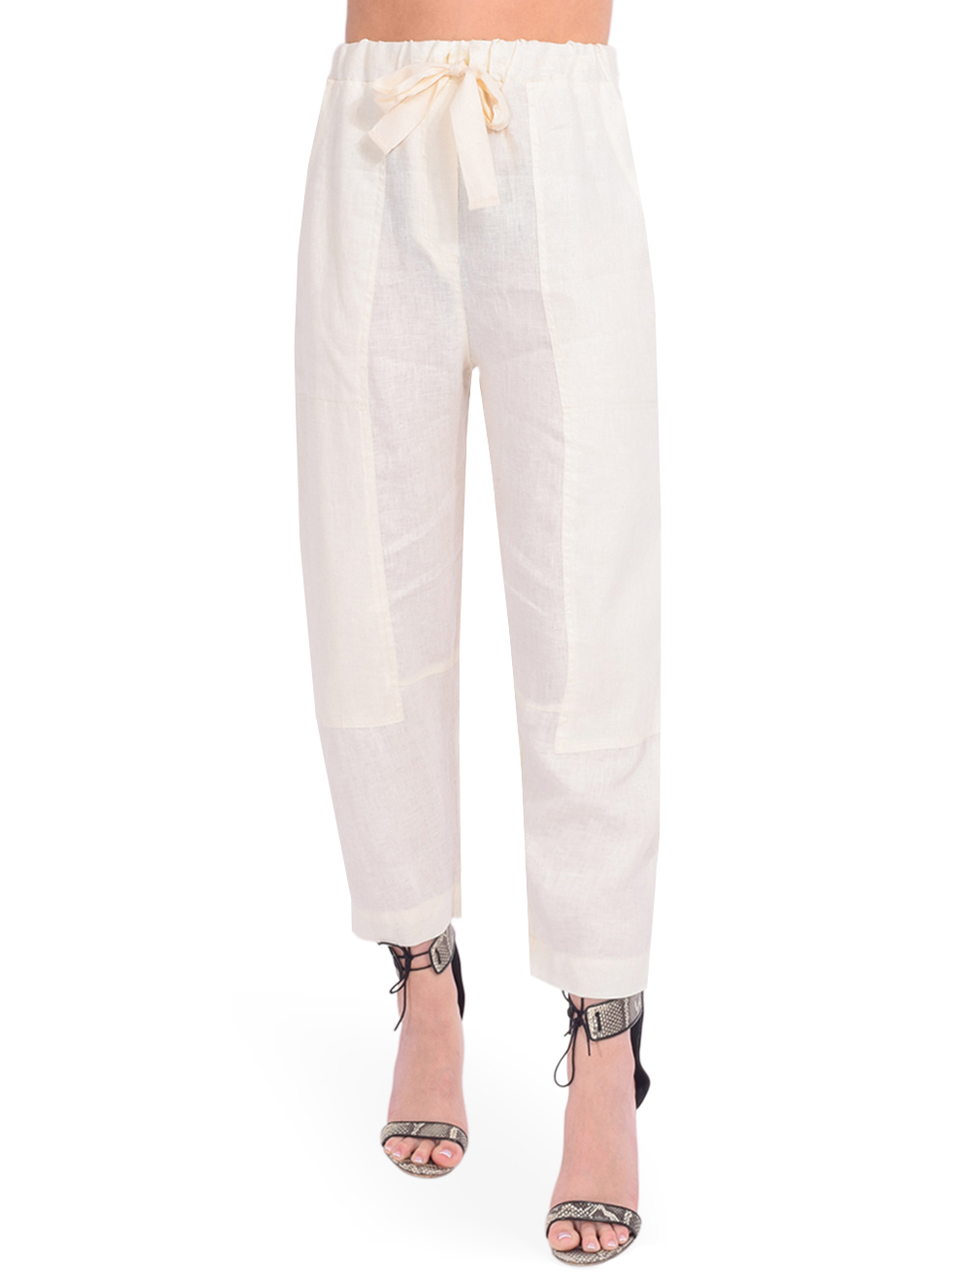 Ottod'Ame Linen Pant in White Front View 